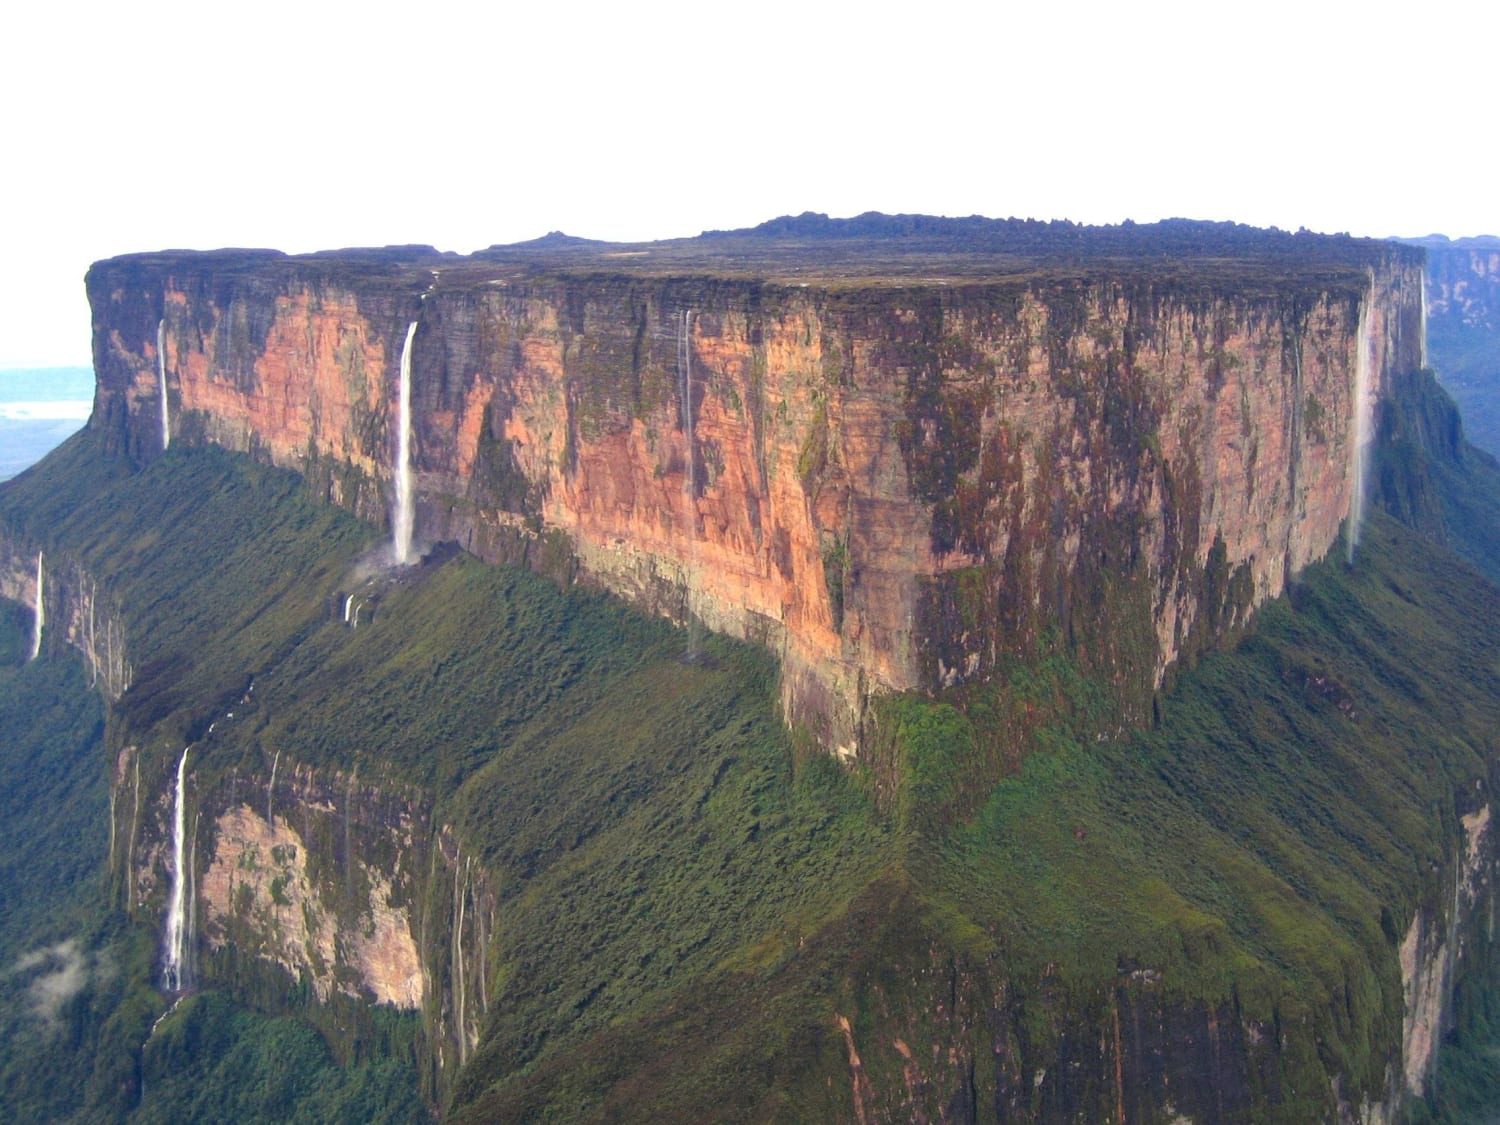 Mount Roraima - Tripoint of Venezuela, Guyana and Brazil, SA - The highest of the Pakaraima chain of table-top mountains in South America - 31 sq. kilometre/12-square-mile summit area bounded on all sides by cliffs rising 400 metres/1,300 ft - First described by Sir Walter Raleigh 1595